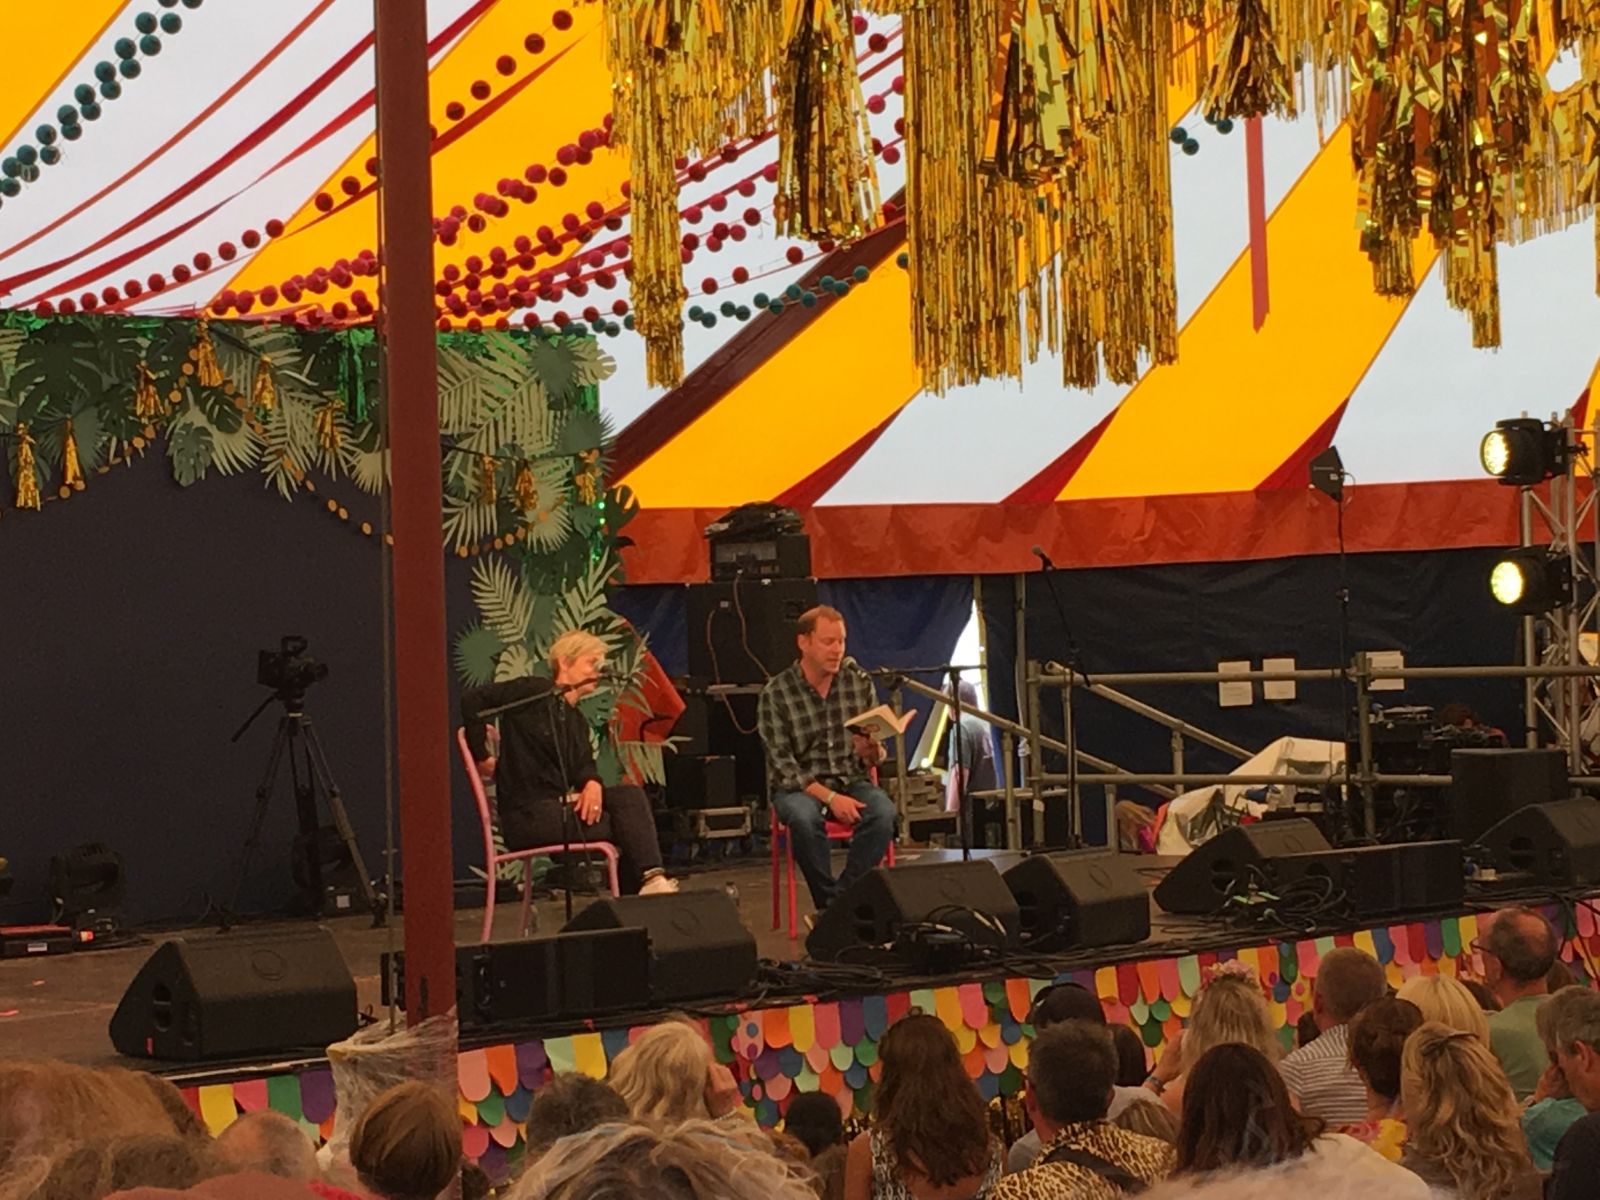 Robert Webb of Peep Show and That Mitchell and Webb Look gave a talk on masculinity at this year's festival.